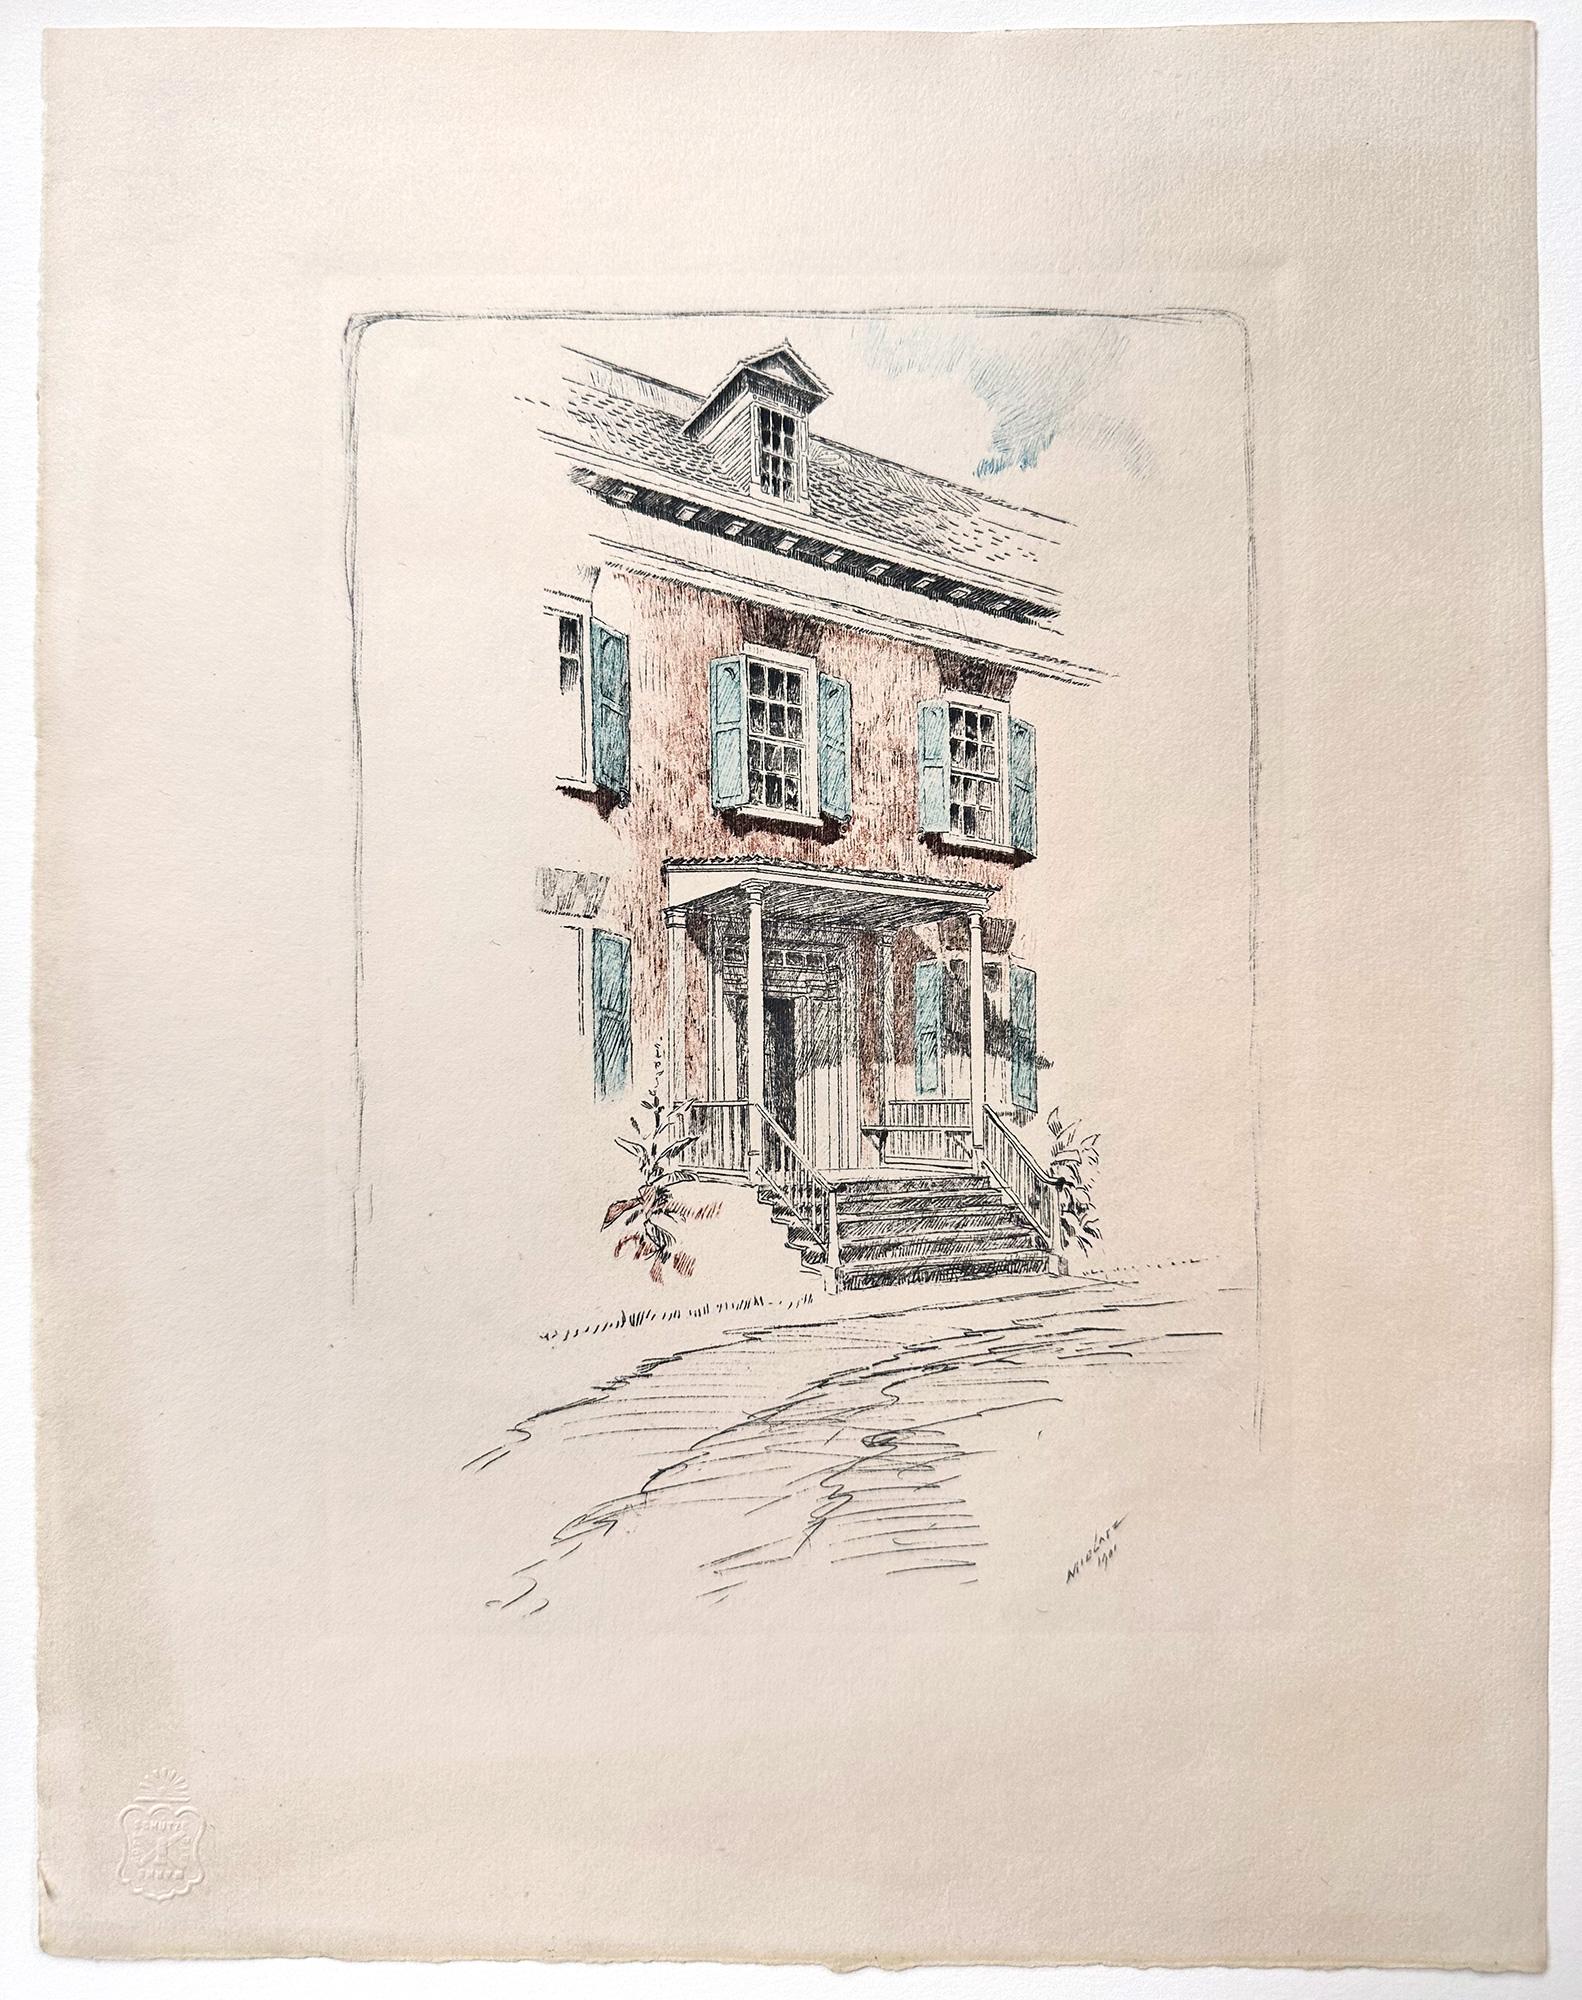 Picturesque New York; Twelve Photogravures from Monotypes - American Modern Print by Charles Frederick William Mielatz